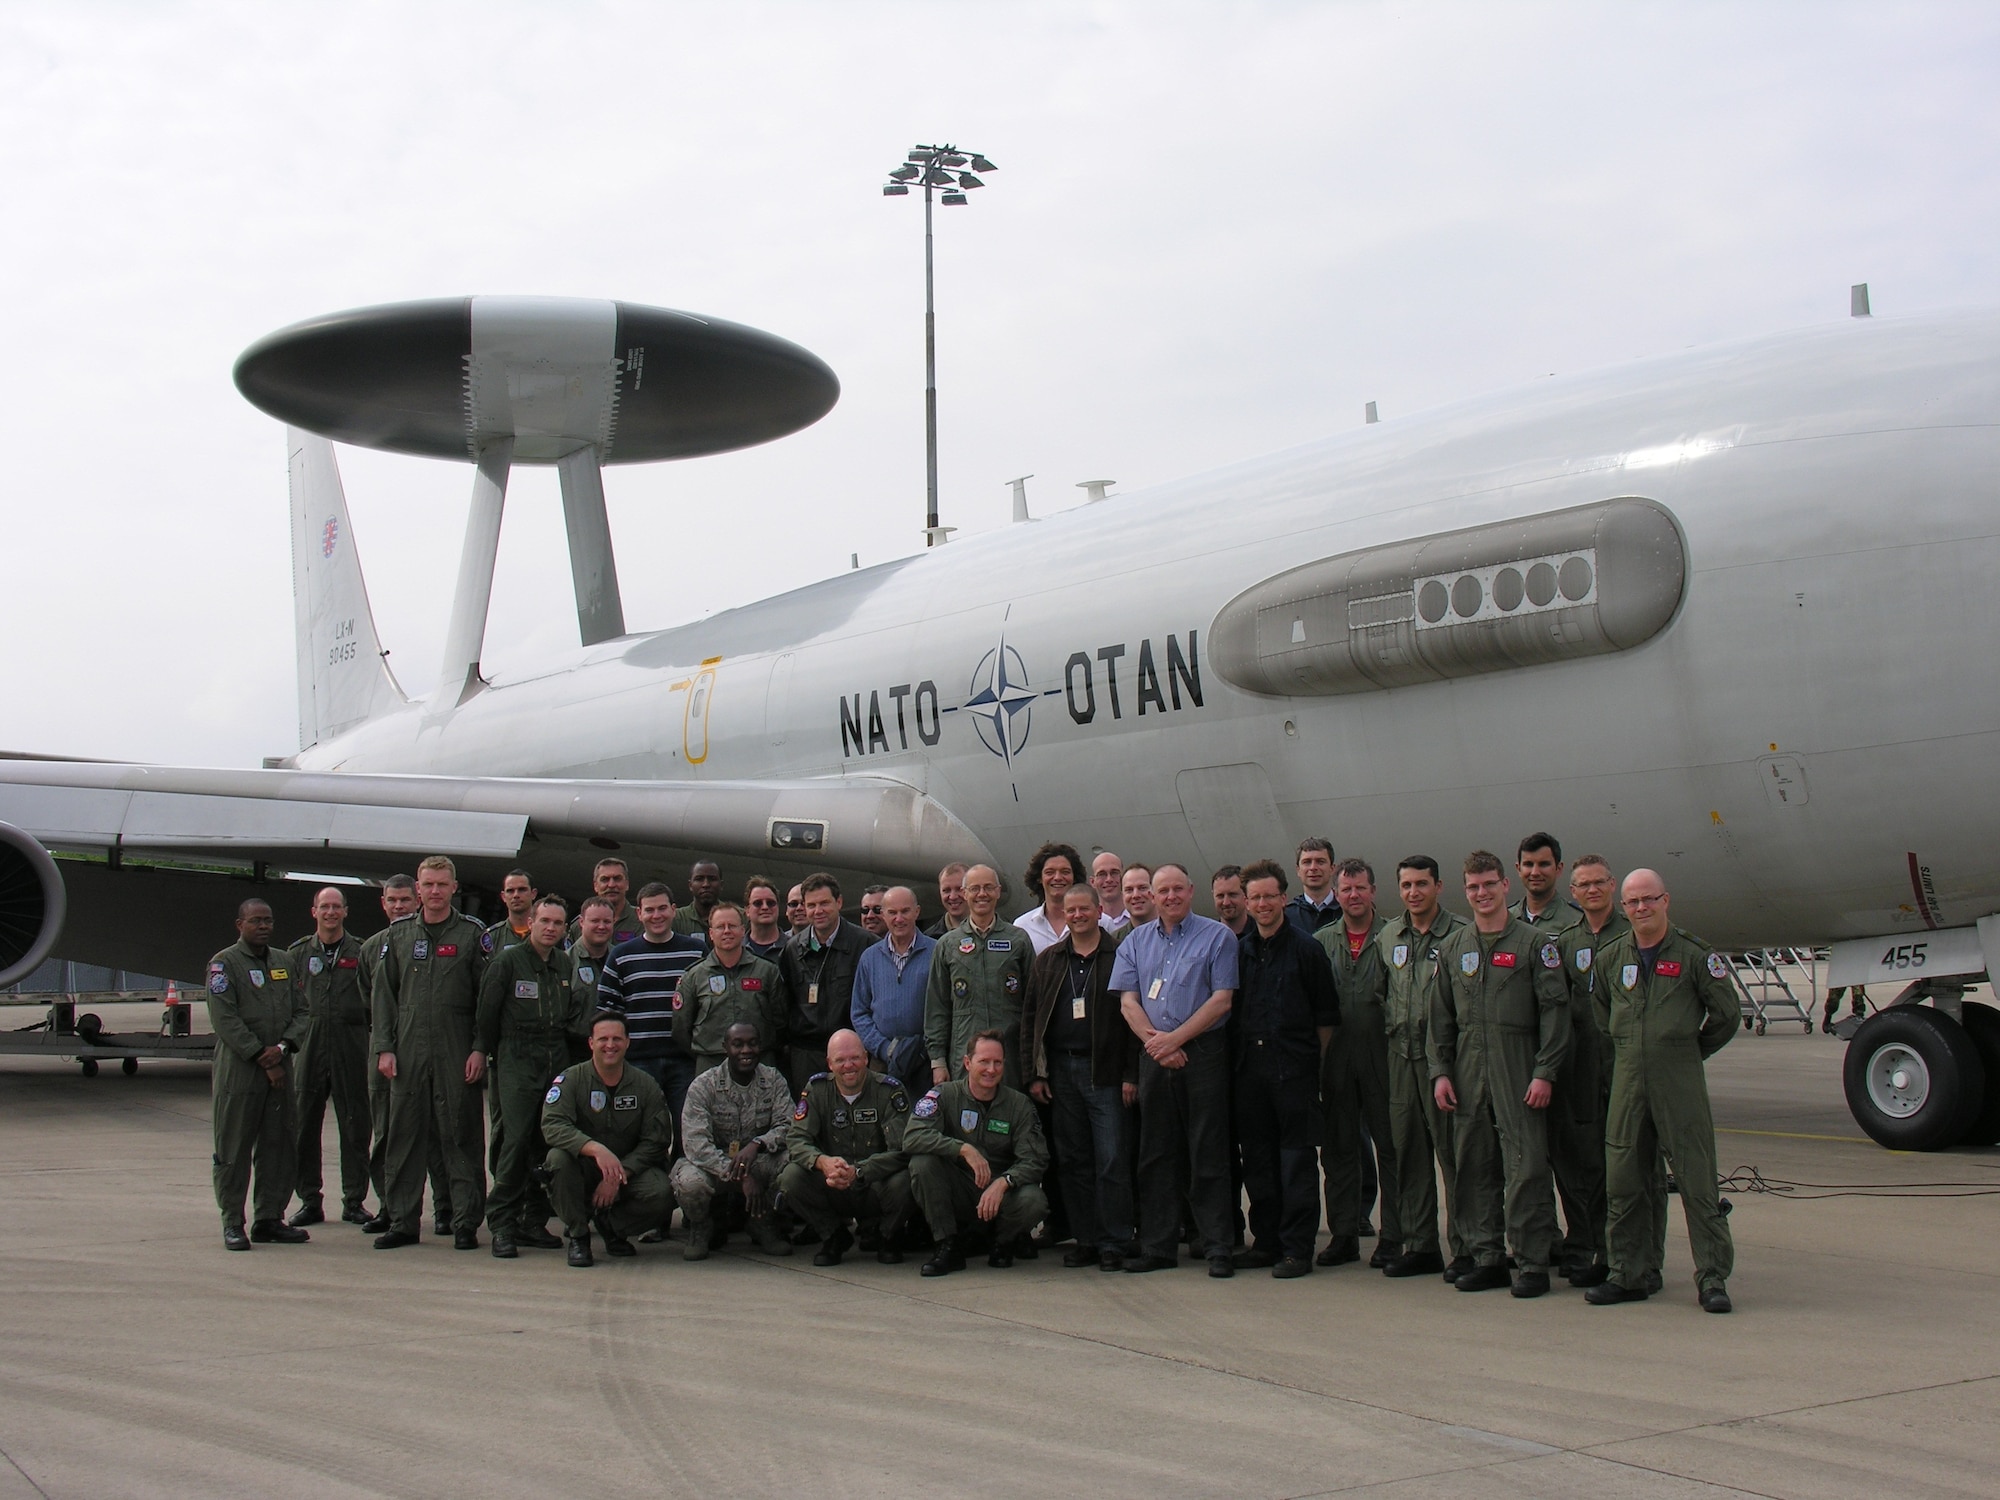 Members of a special E-3 Airborne Warning and Control System testing team pose for a group photo after a flight trial held in Germany last month. The ground and flight tests on a NATO AWACS made strides in proving that the waveforms cause no interference to military and civilian air traffic control. Participants included representation from ESC's 635th Electronic Systems Squadron, Belgium, the European Union, France, Germany, Italy, NATO, the Netherlands, United Kingdom and United States. (Courtesy photo)
